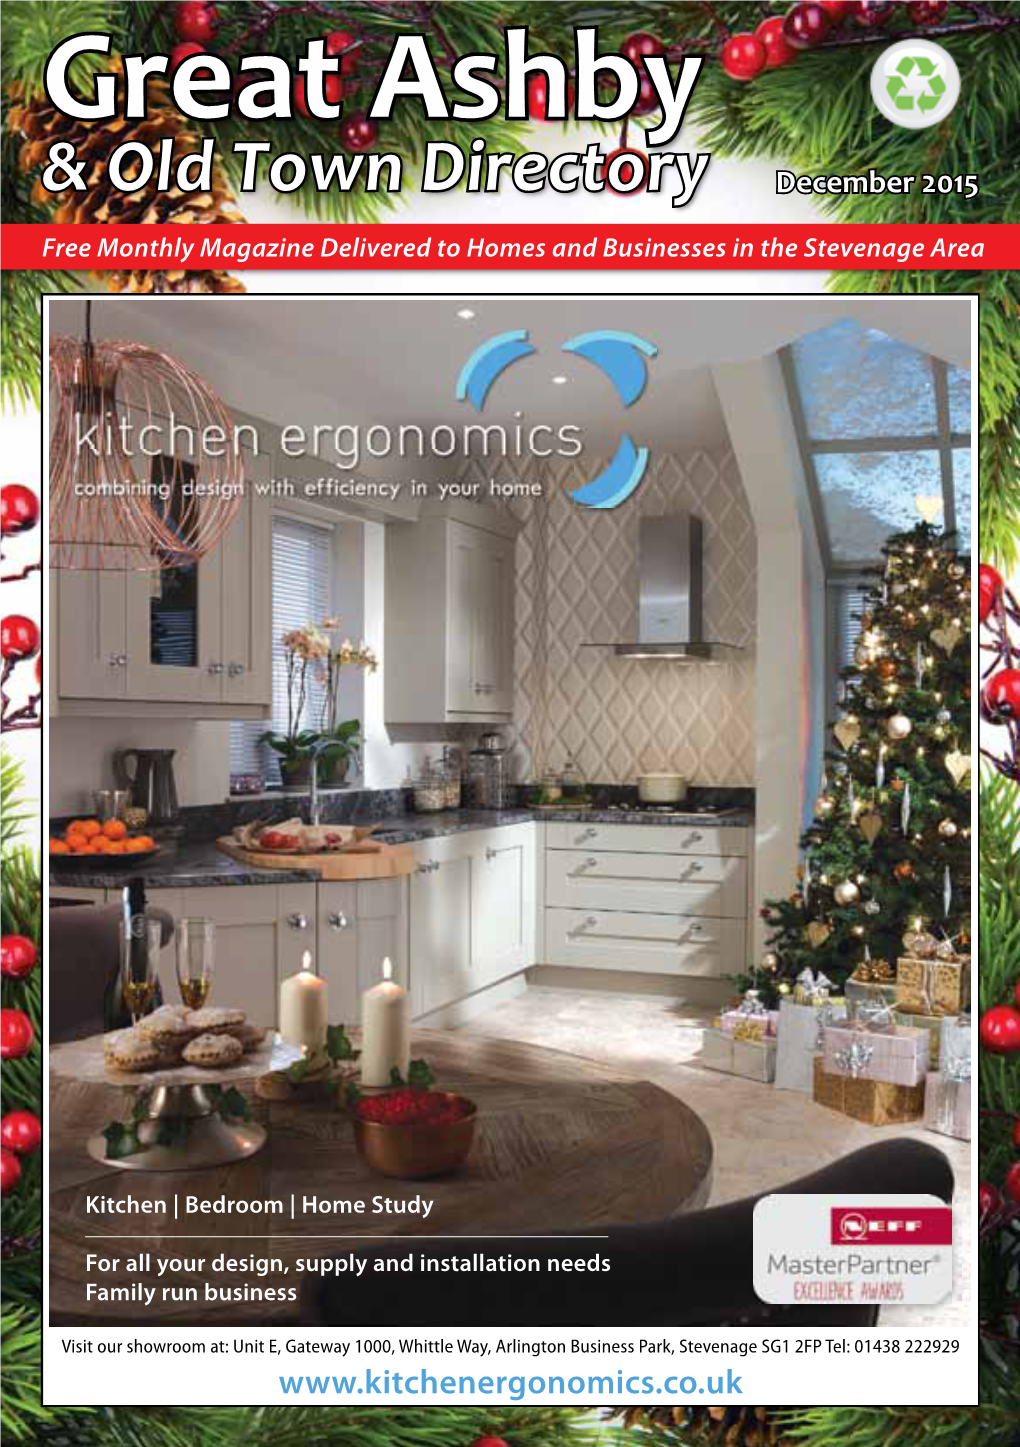 Great Ashby & Old Town Directory December 2015 Free Monthly Magazine Delivered to Homes and Businesses in the Stevenage Area